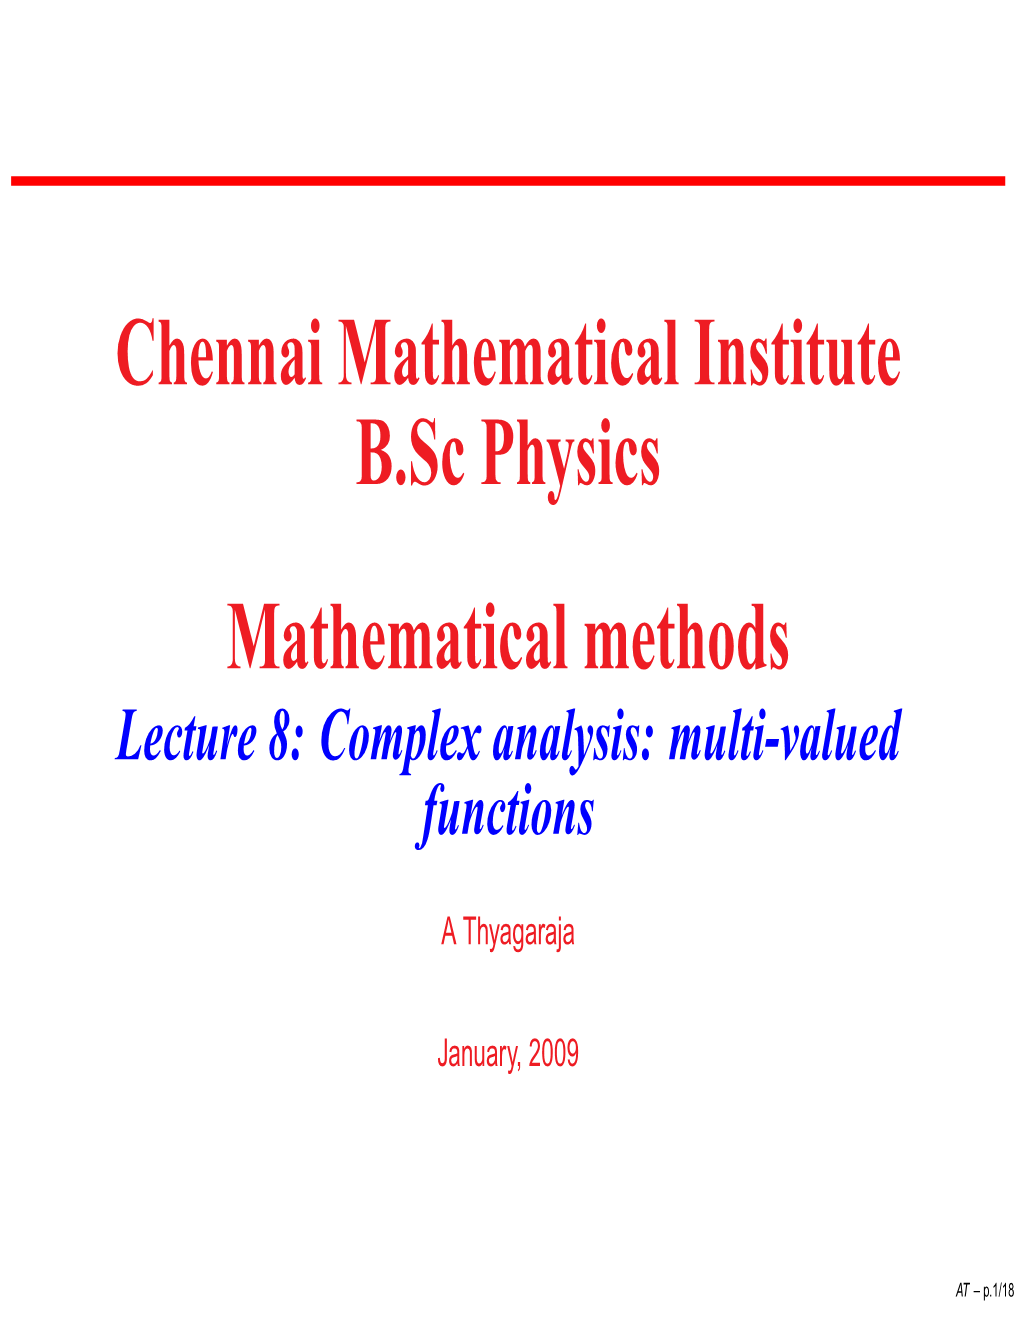 Lecture 8: Complex Analysis: Multi-Valued Functions